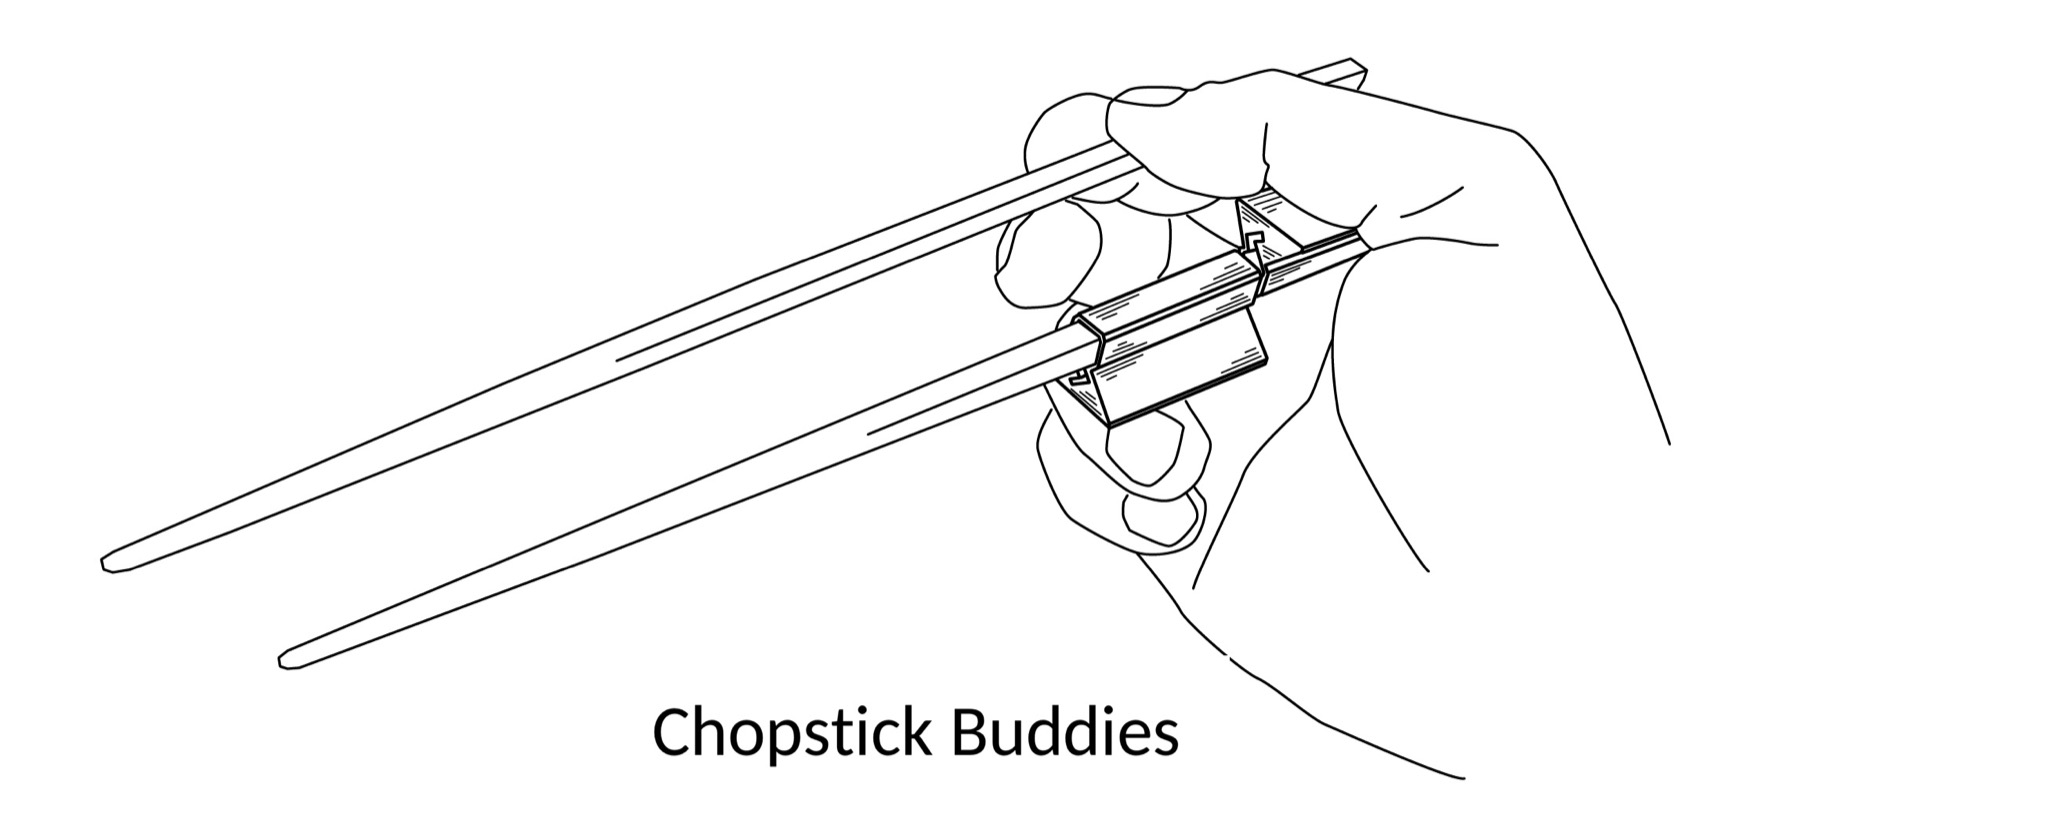 You are currently viewing Model B: Chopstick Buddies